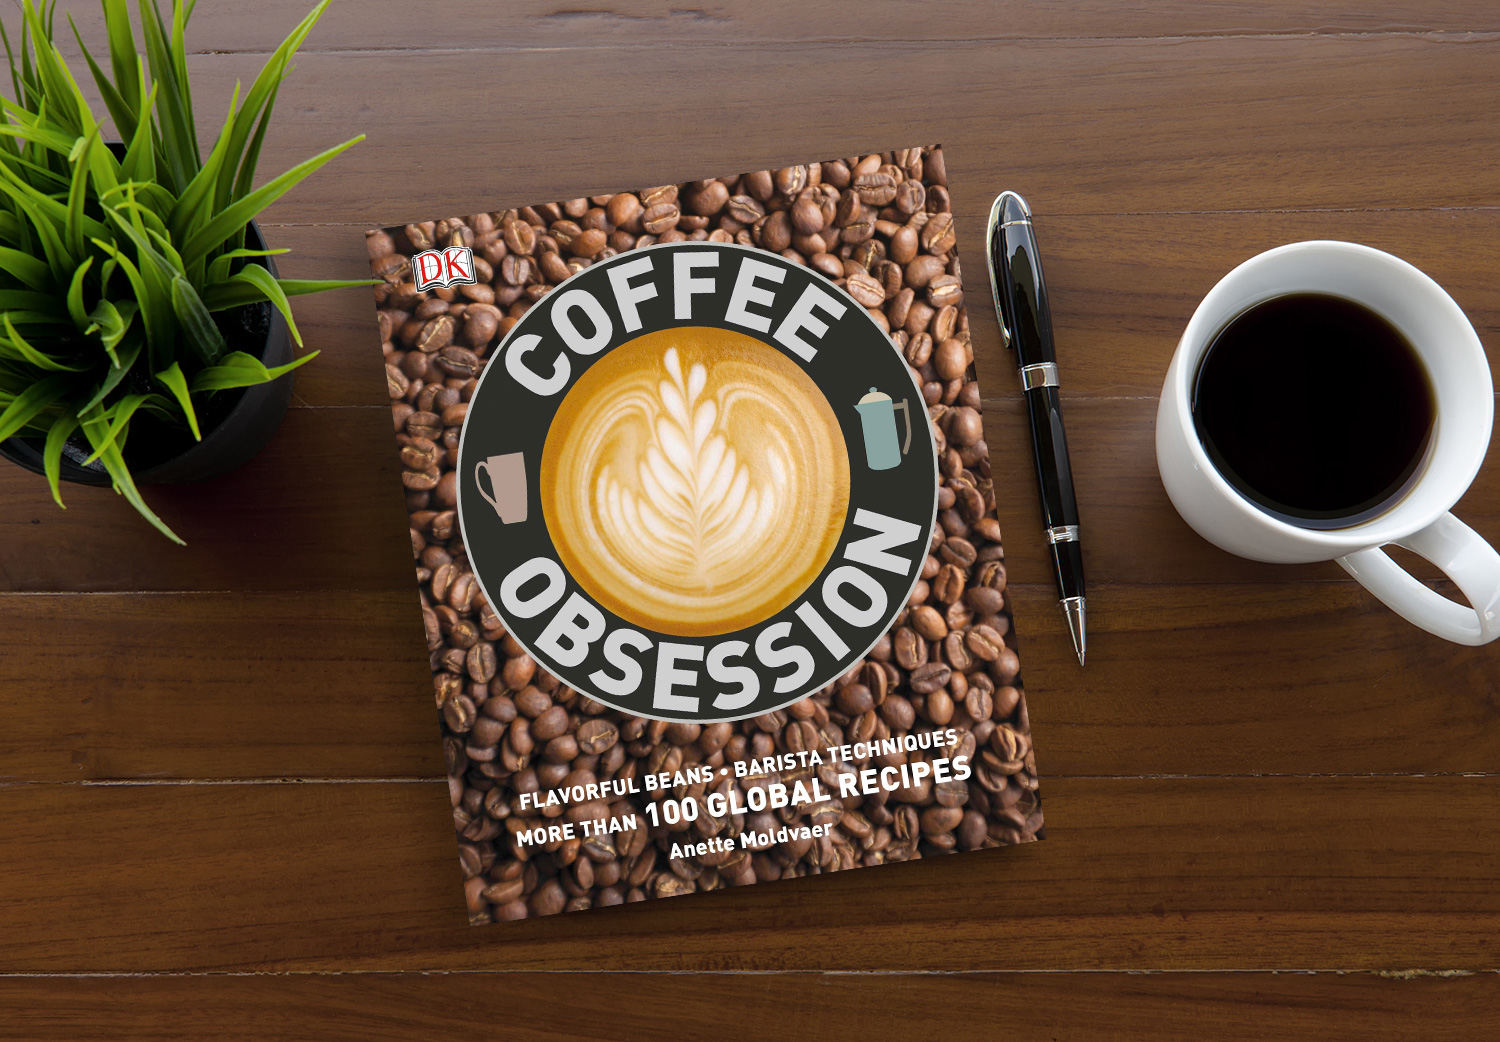 Coffee Obsession by Anette Moldvaer on a wooden table.